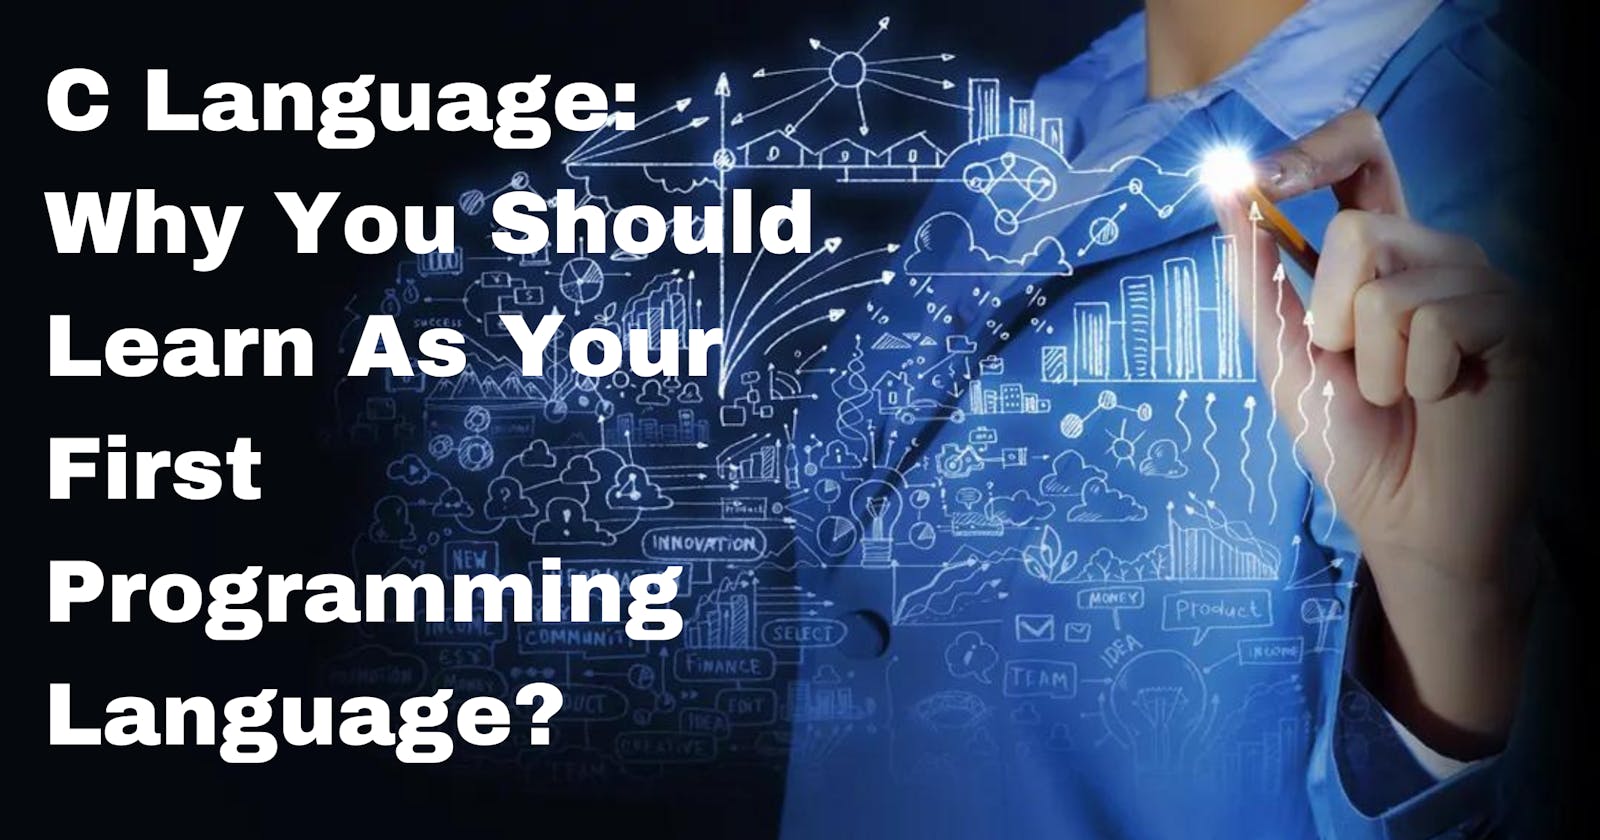 ➡️C Language: Why You Should Learn As Your First Programming Language?